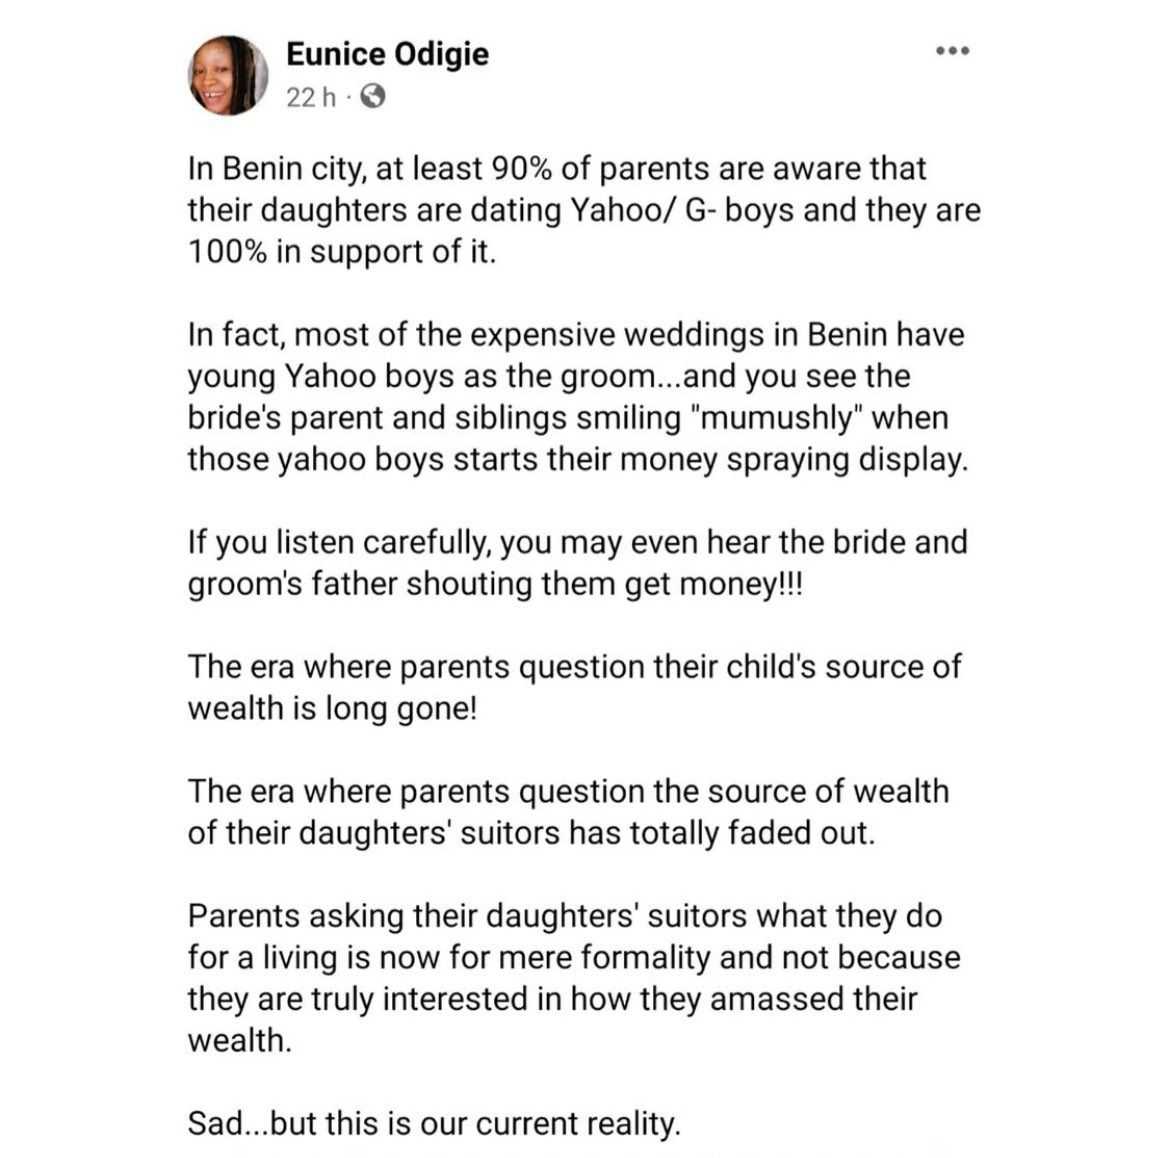 Lady questions morality of parents